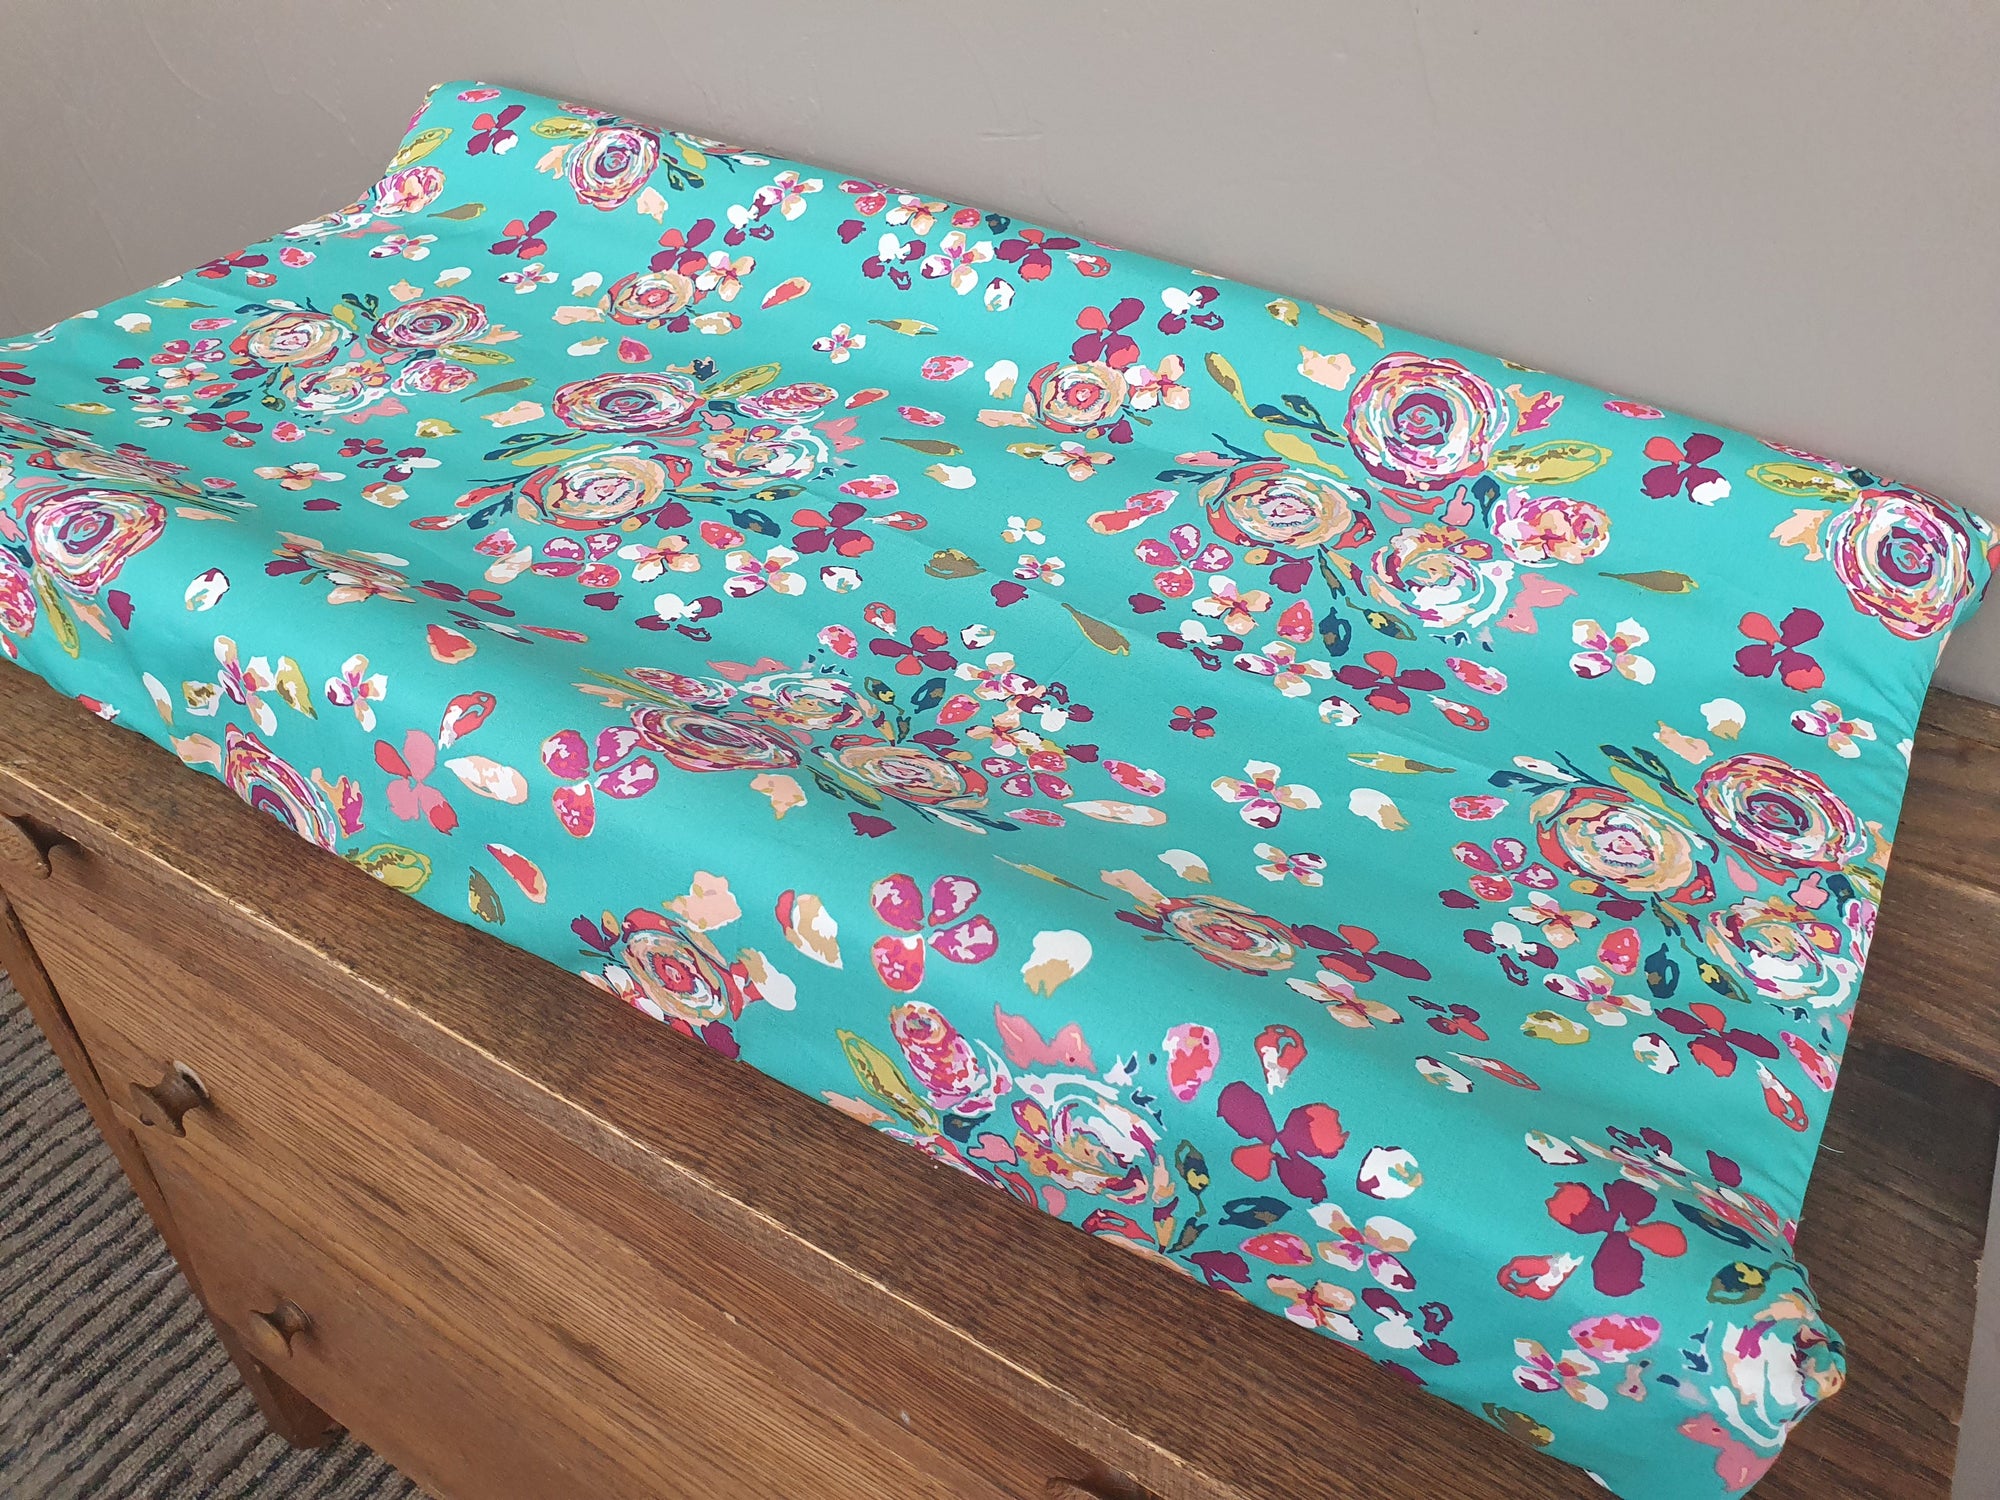 New Release Girl Crib Bedding- Teal Floral and Cow Minky Ranch Baby Bedding Collection - DBC Baby Bedding Co 